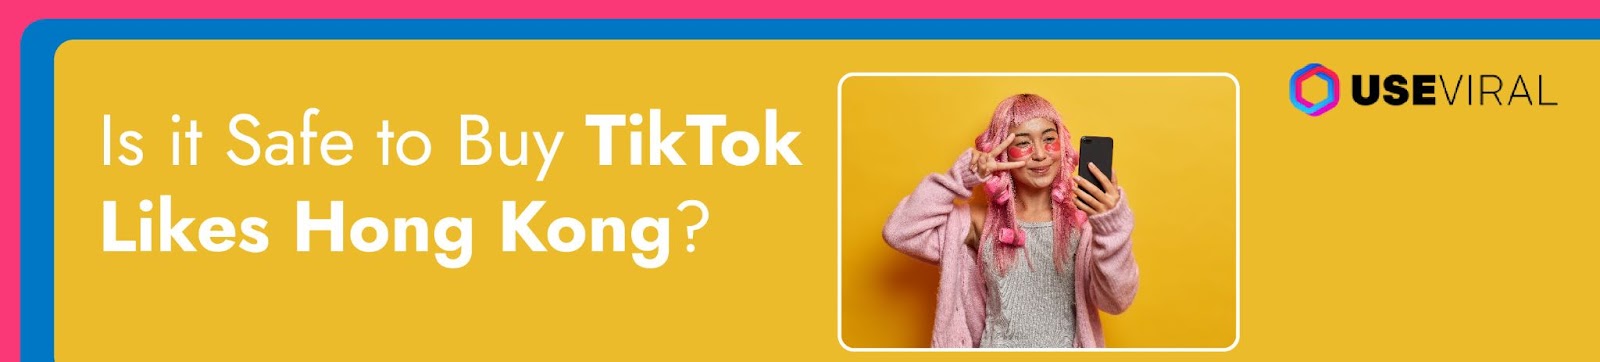 Is  it Safe to Buy TikTok Likes Hong Kong?